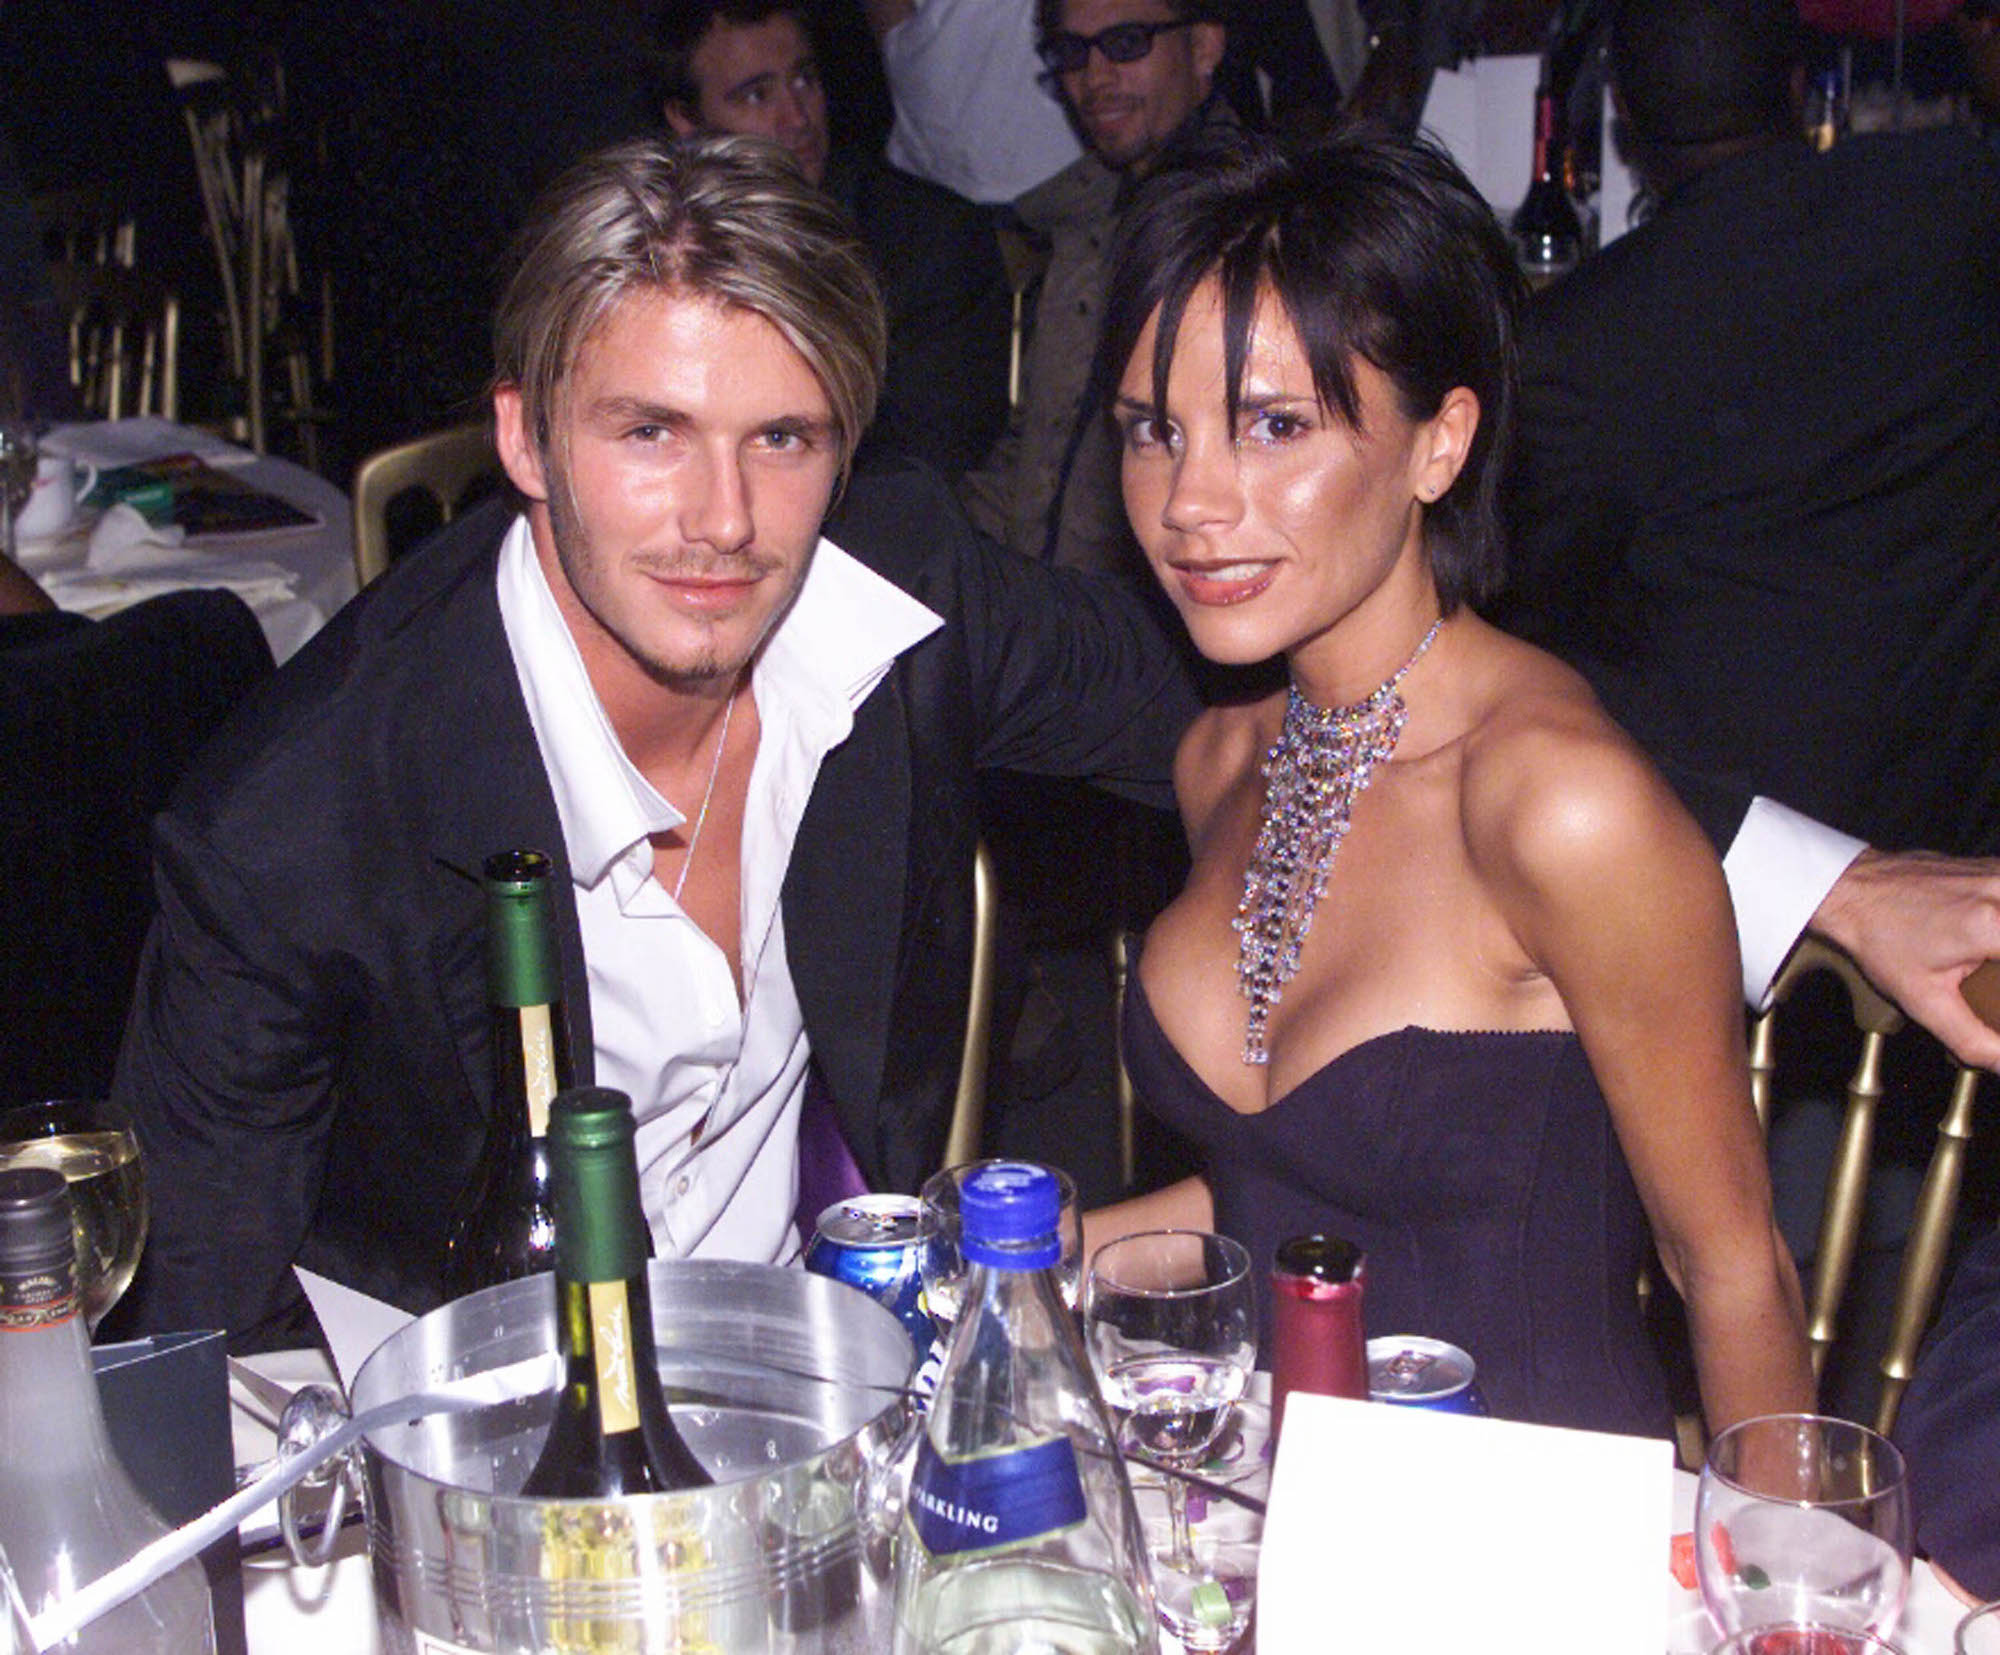 David Beckham and Victoria Beckham attending the MOBO Awards in 1999